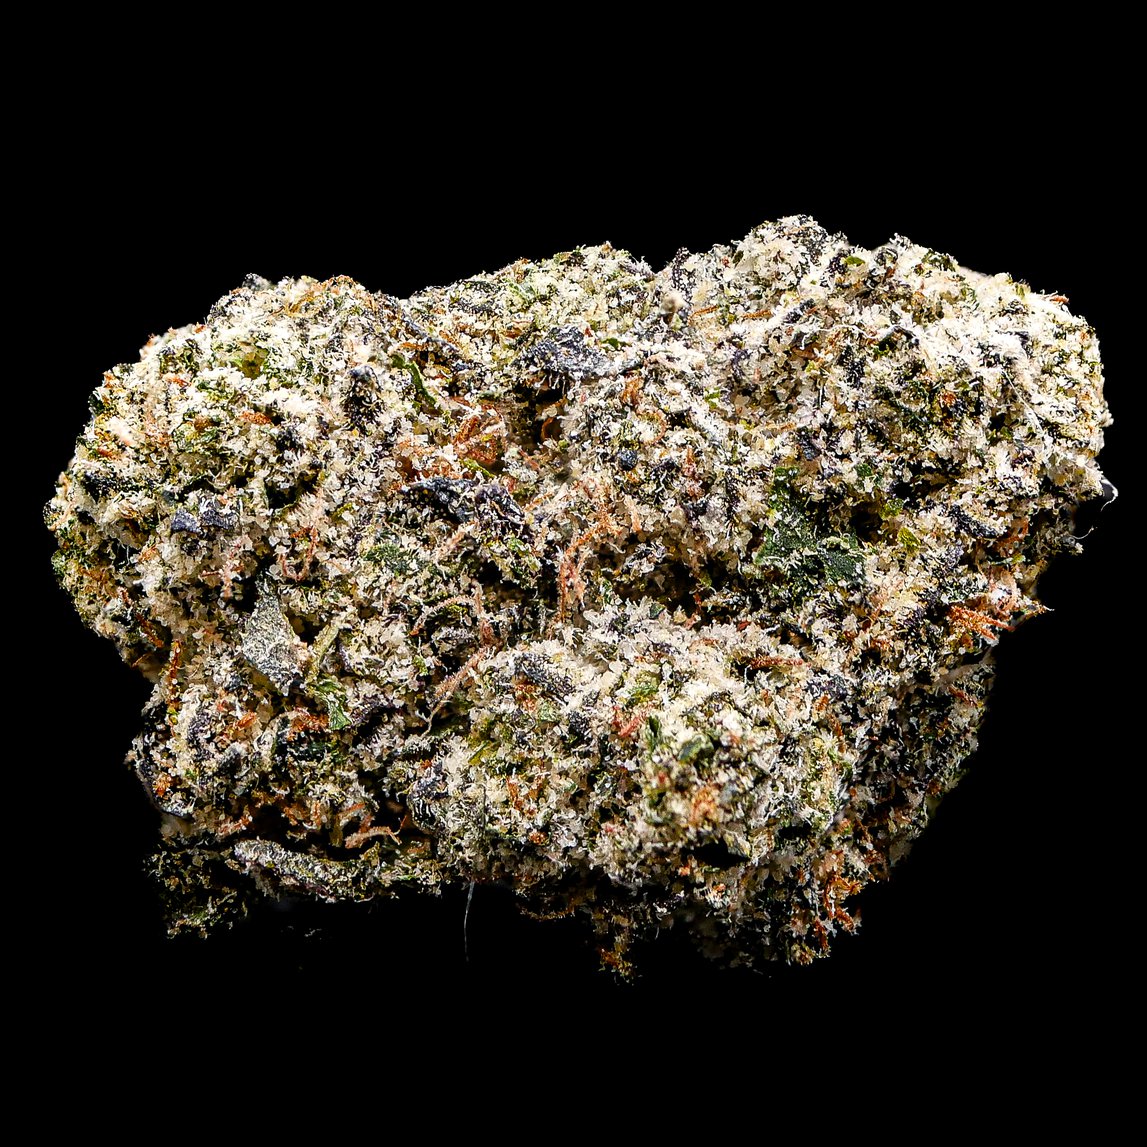 Tommy's Apples (Indica)